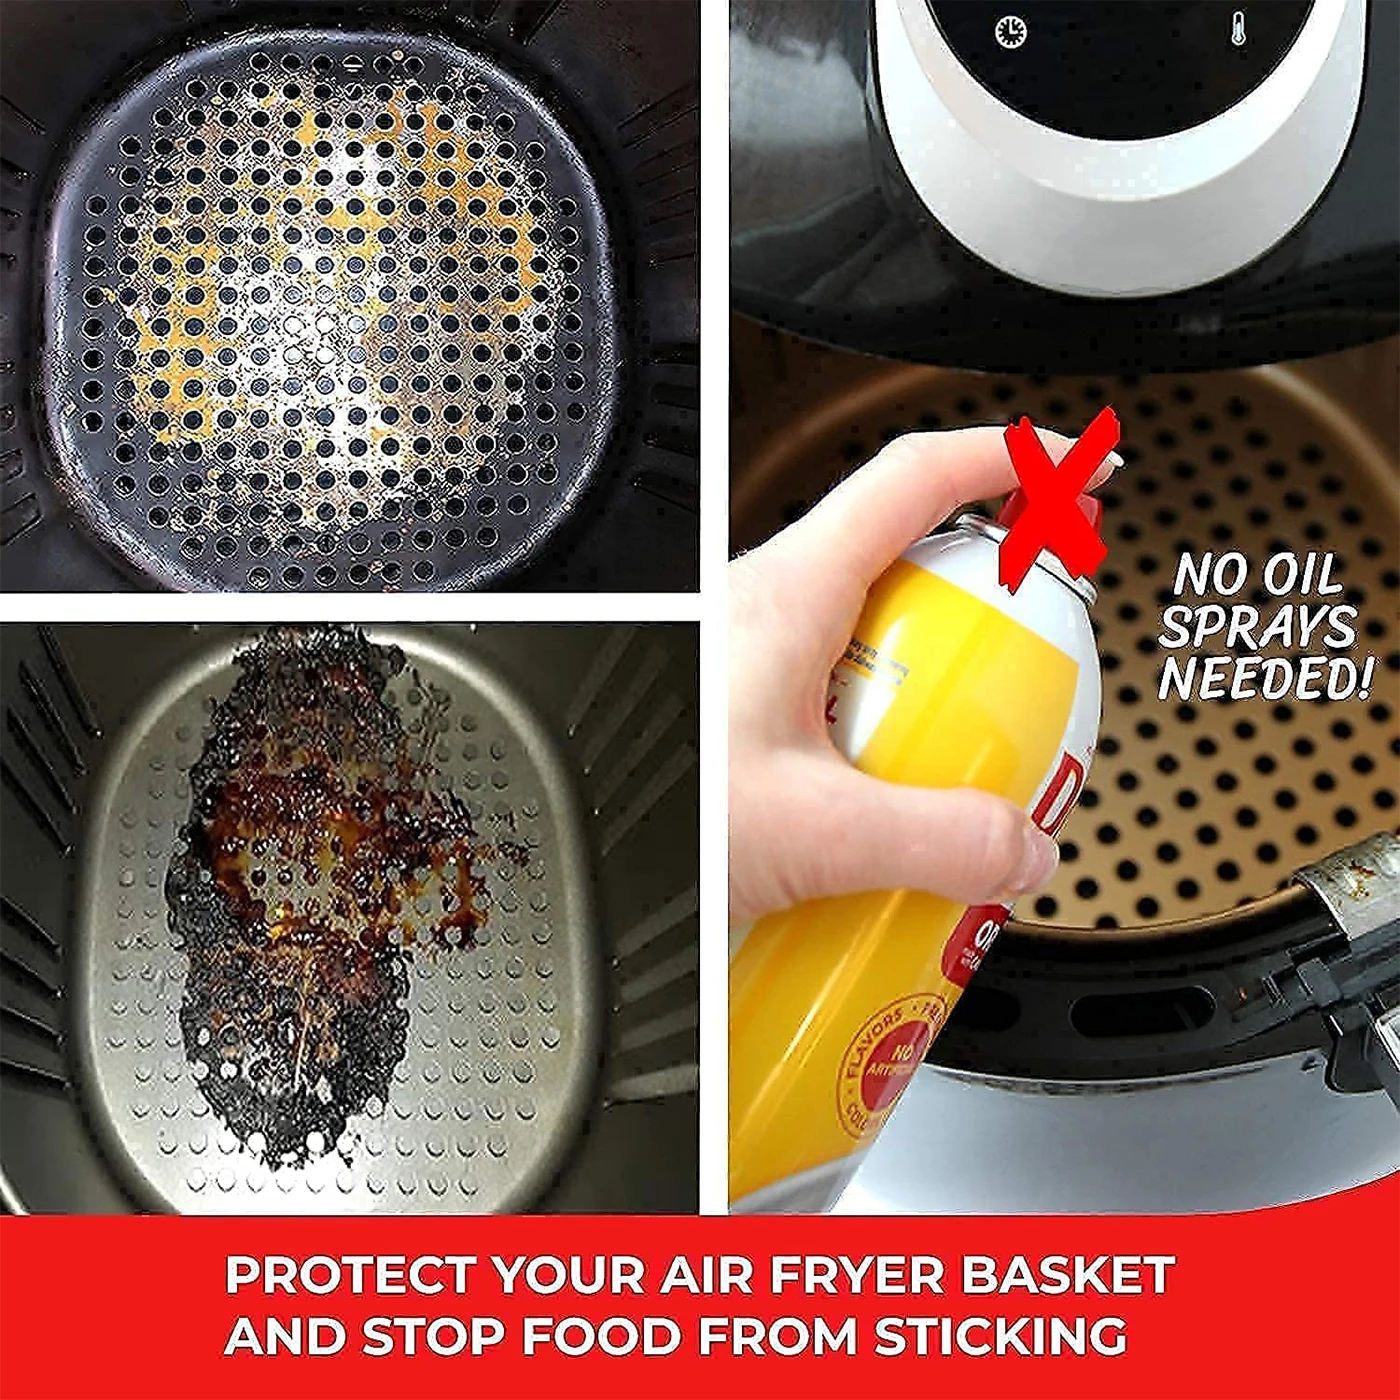 https://ae01.alicdn.com/kf/He5620098767543bb8c335f0807c03df1F/3Pcs-Air-Fryer-Liners-Food-Grade-Reusable-Silicone-Non-Stick-Steaming-Basket-Mat-Anti-slip-Air.jpg